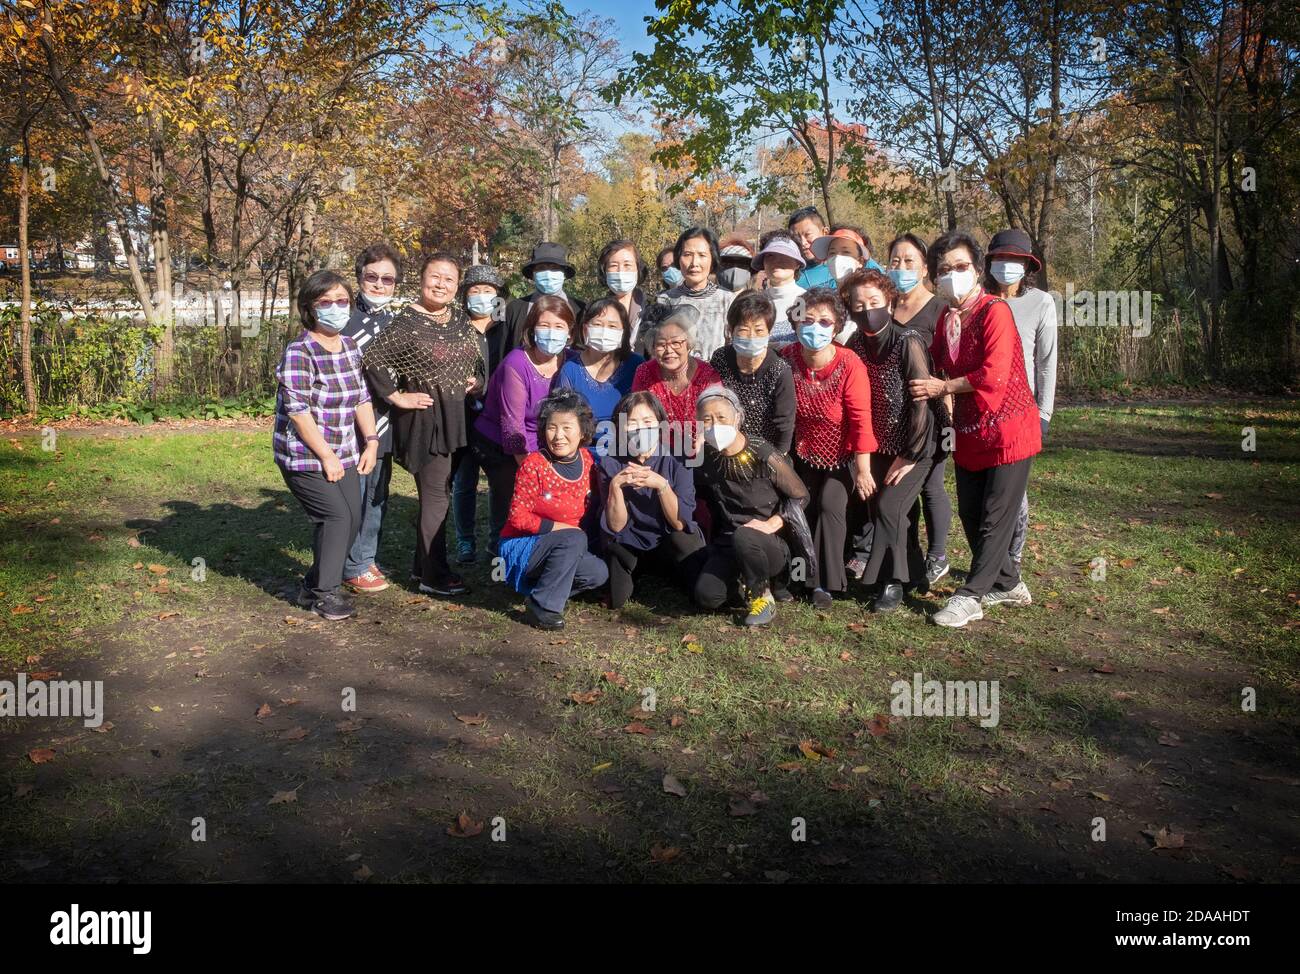 A group photo of middle age & older Korean Americans who meet in Kissena Park for dance exercises classes. Stock Photo